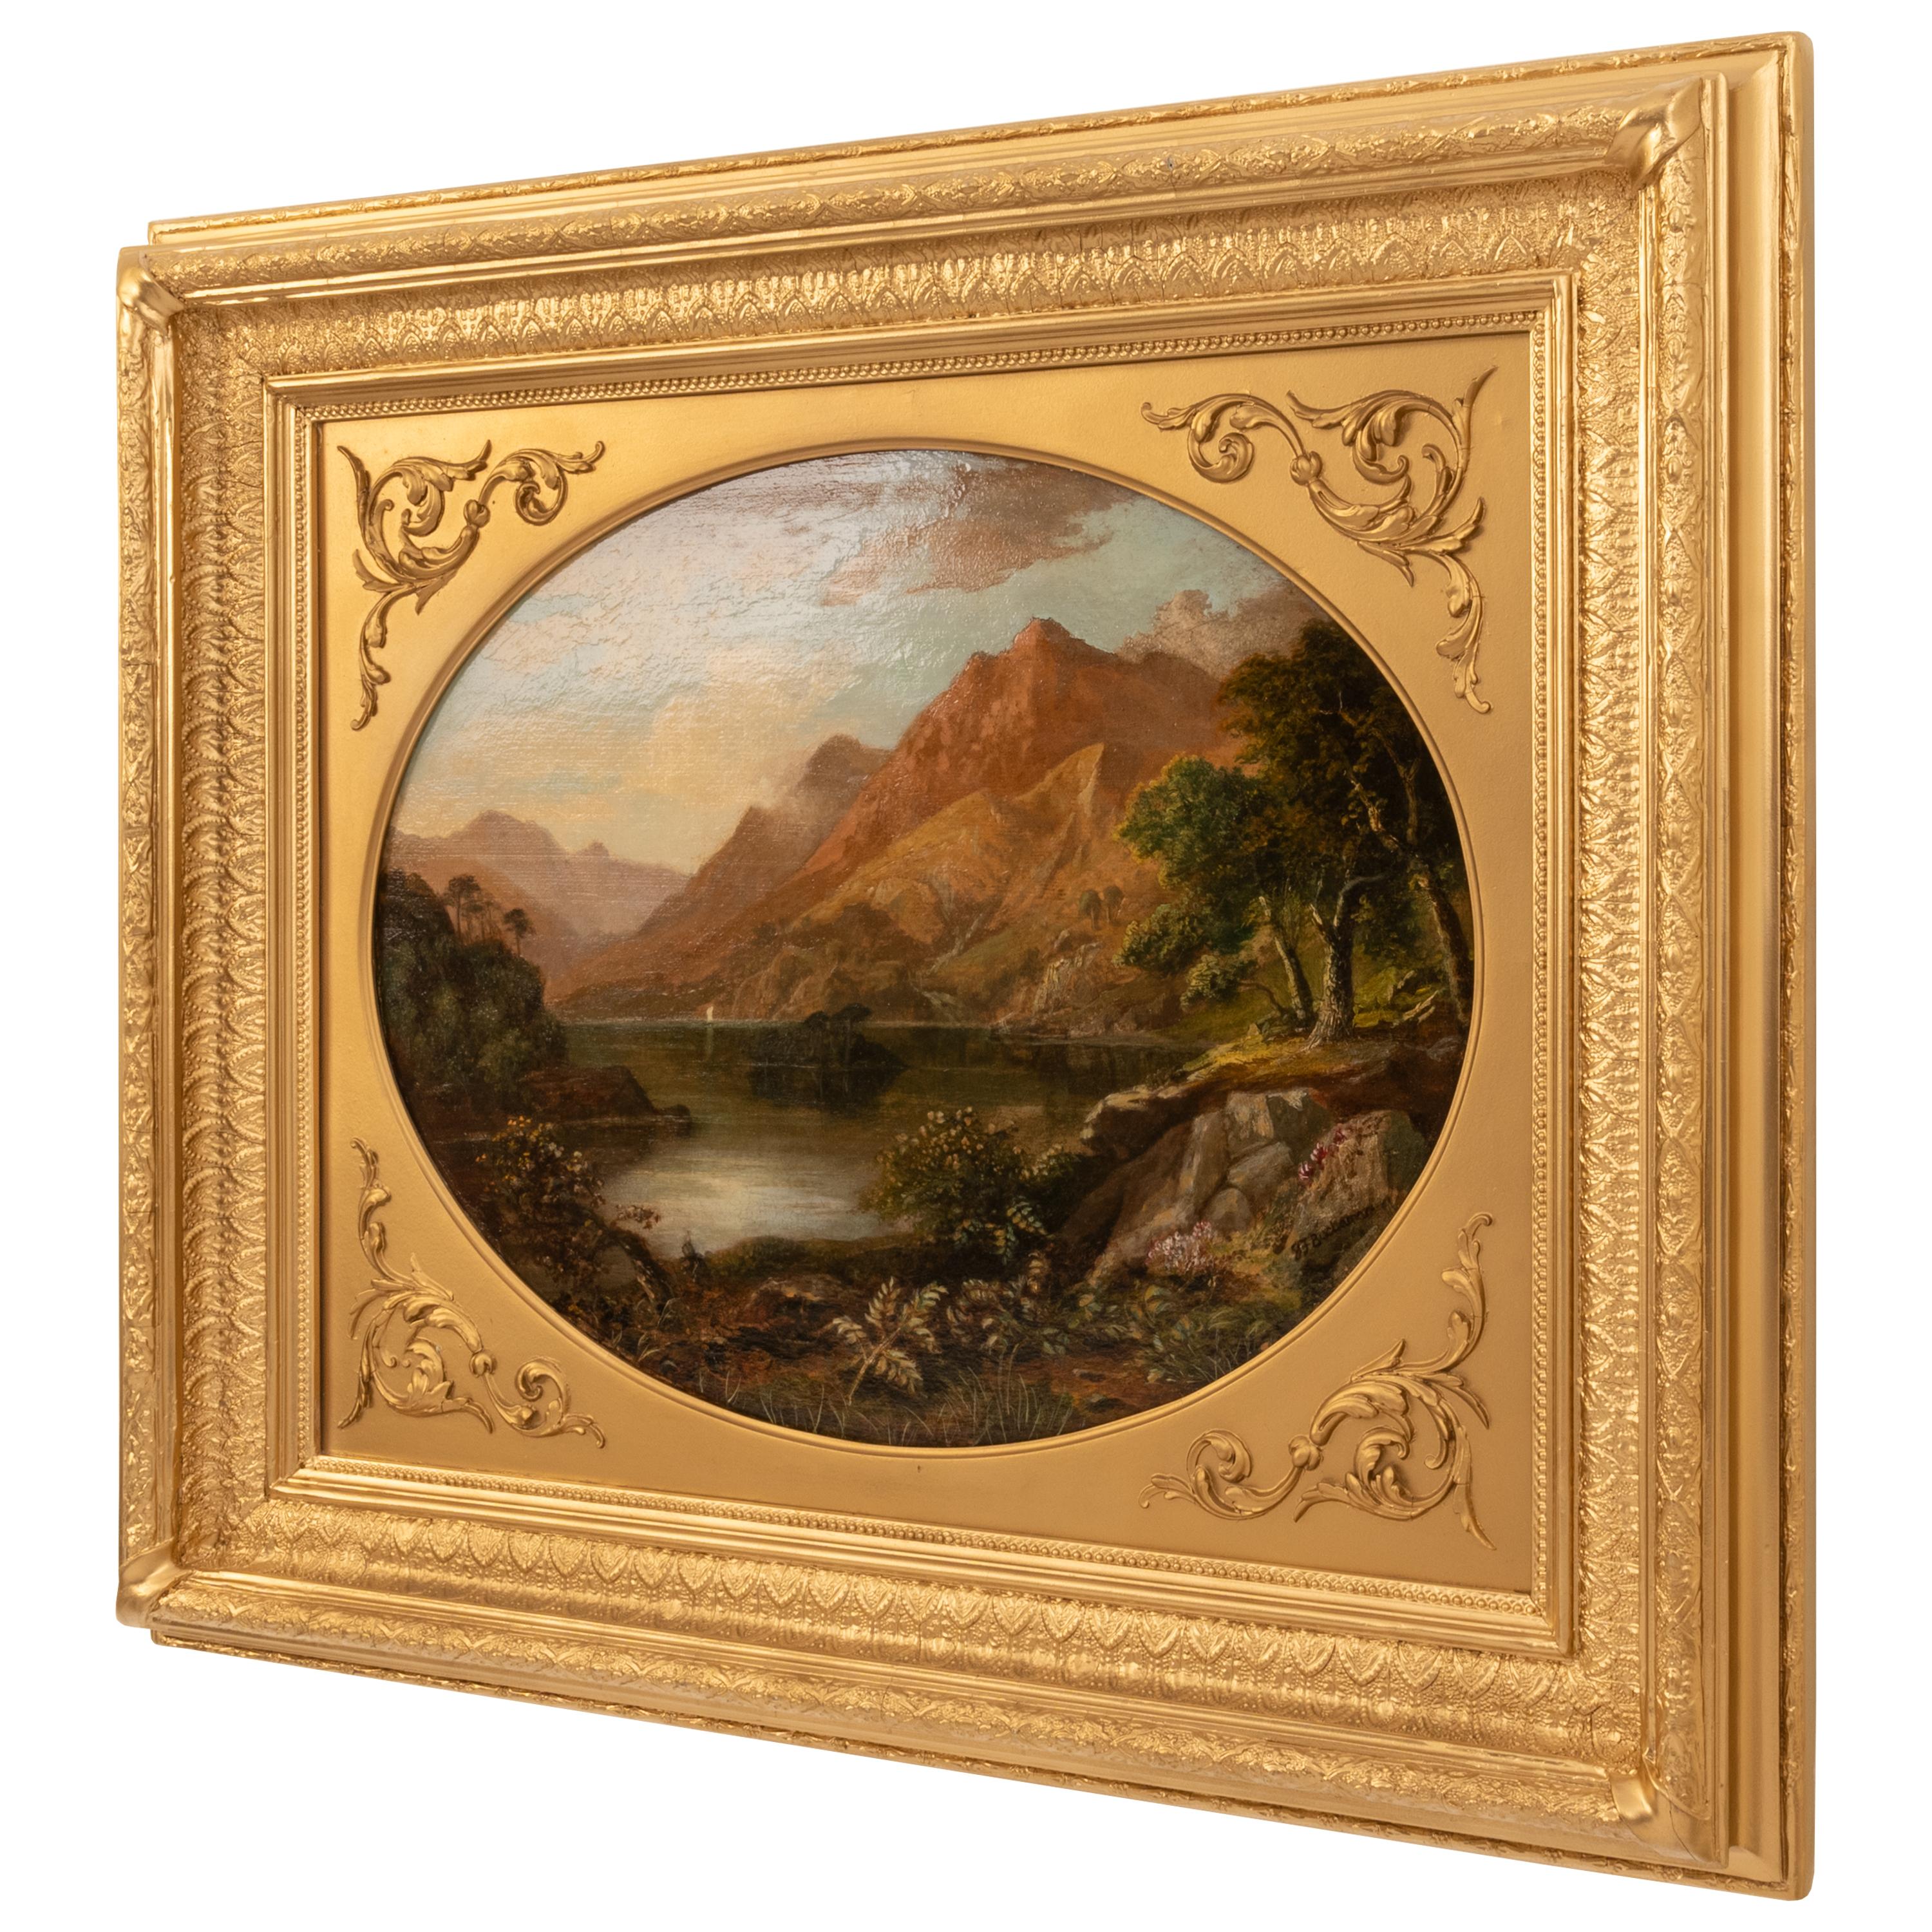 A fine pair of antique oil paintings Scottish Highland Scenes by George Frederick Buchanan (1800-1874)
Landscapist George Frederick Buchanan was based in Edinburgh when he first exhibited at the Scottish Academy in 1841. He had moved to Glasgow by